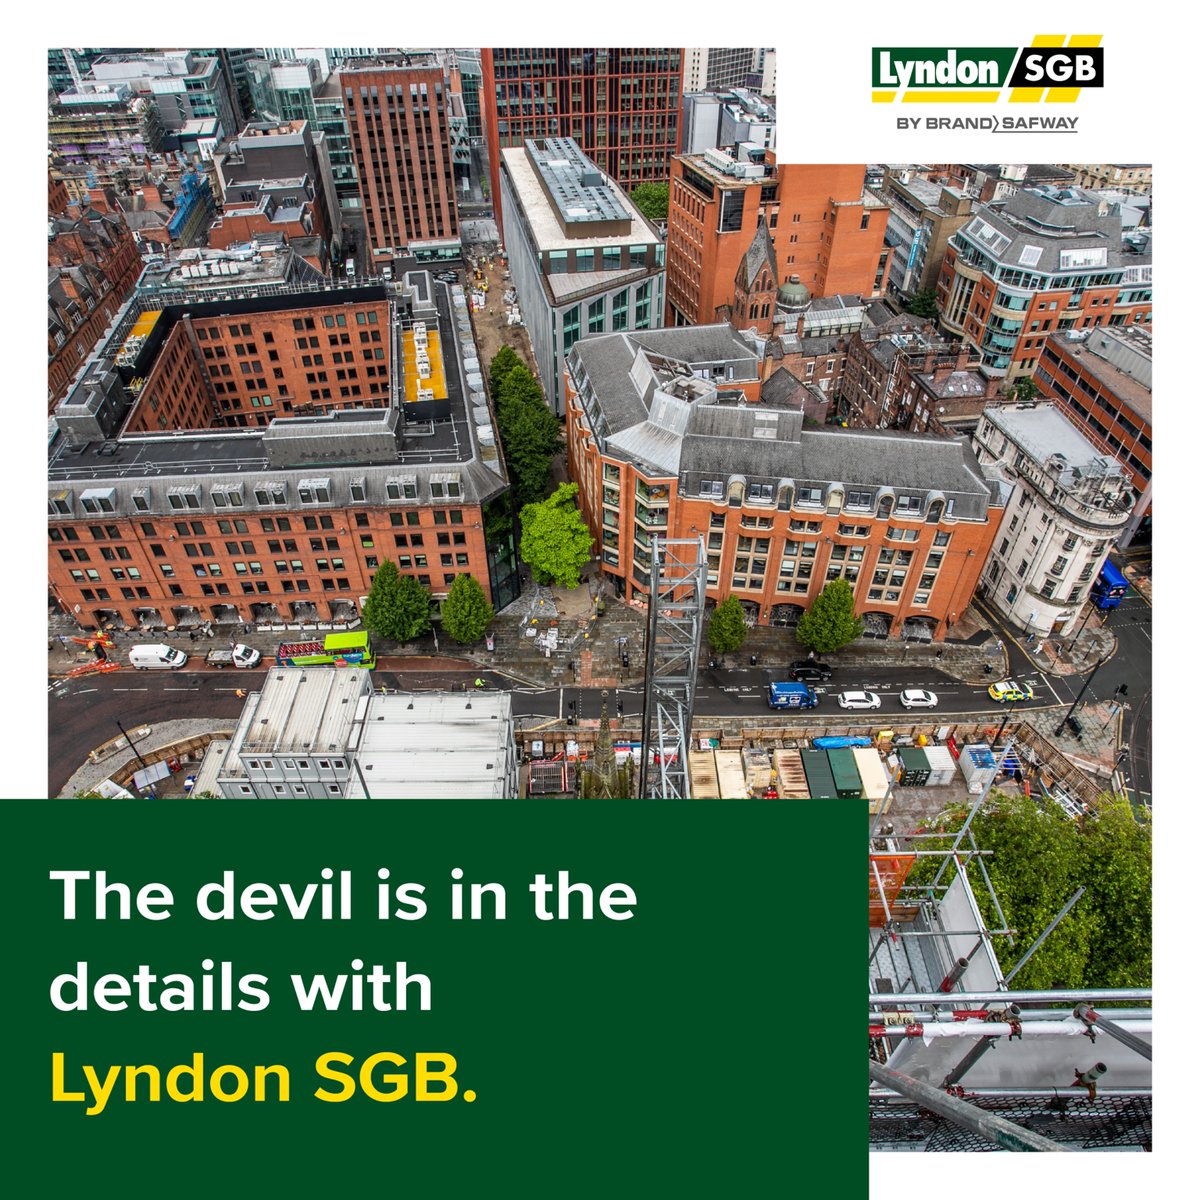 Q: How do you get the materials onto a bustling city centre #construction site safely for 10,000m2 of weather protection? ⛈️ A: With great care! And a passion for #safety #logistics! 👇🏻 ow.ly/Gebp50R6sTa #LyndonSGB #WeAreOne #MoreSafety #MoreProductivity #AtWorkForYou